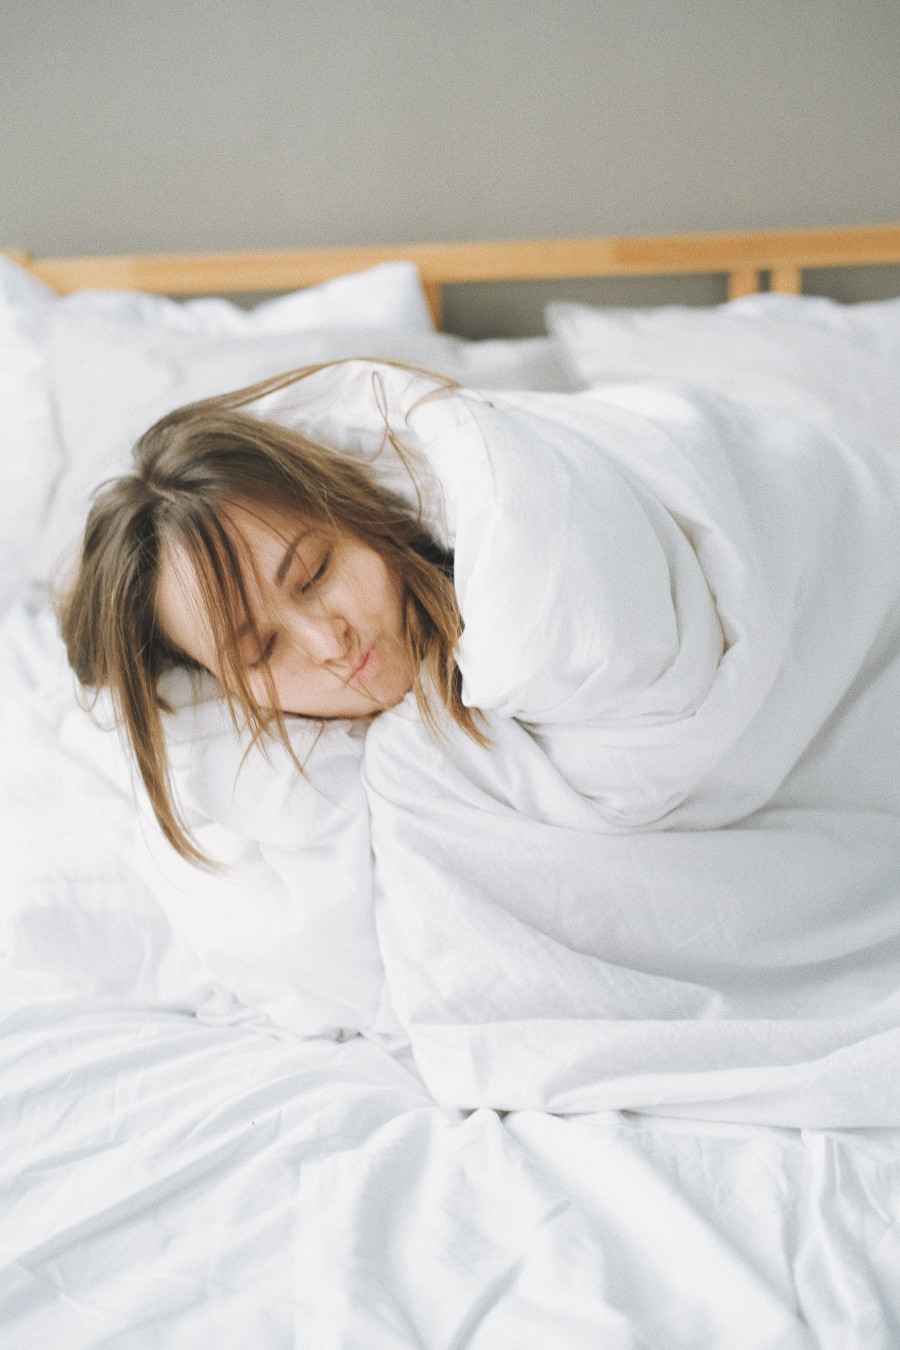 Sleeping with wet hair: advantageous for health or not? - Whatsmagazine